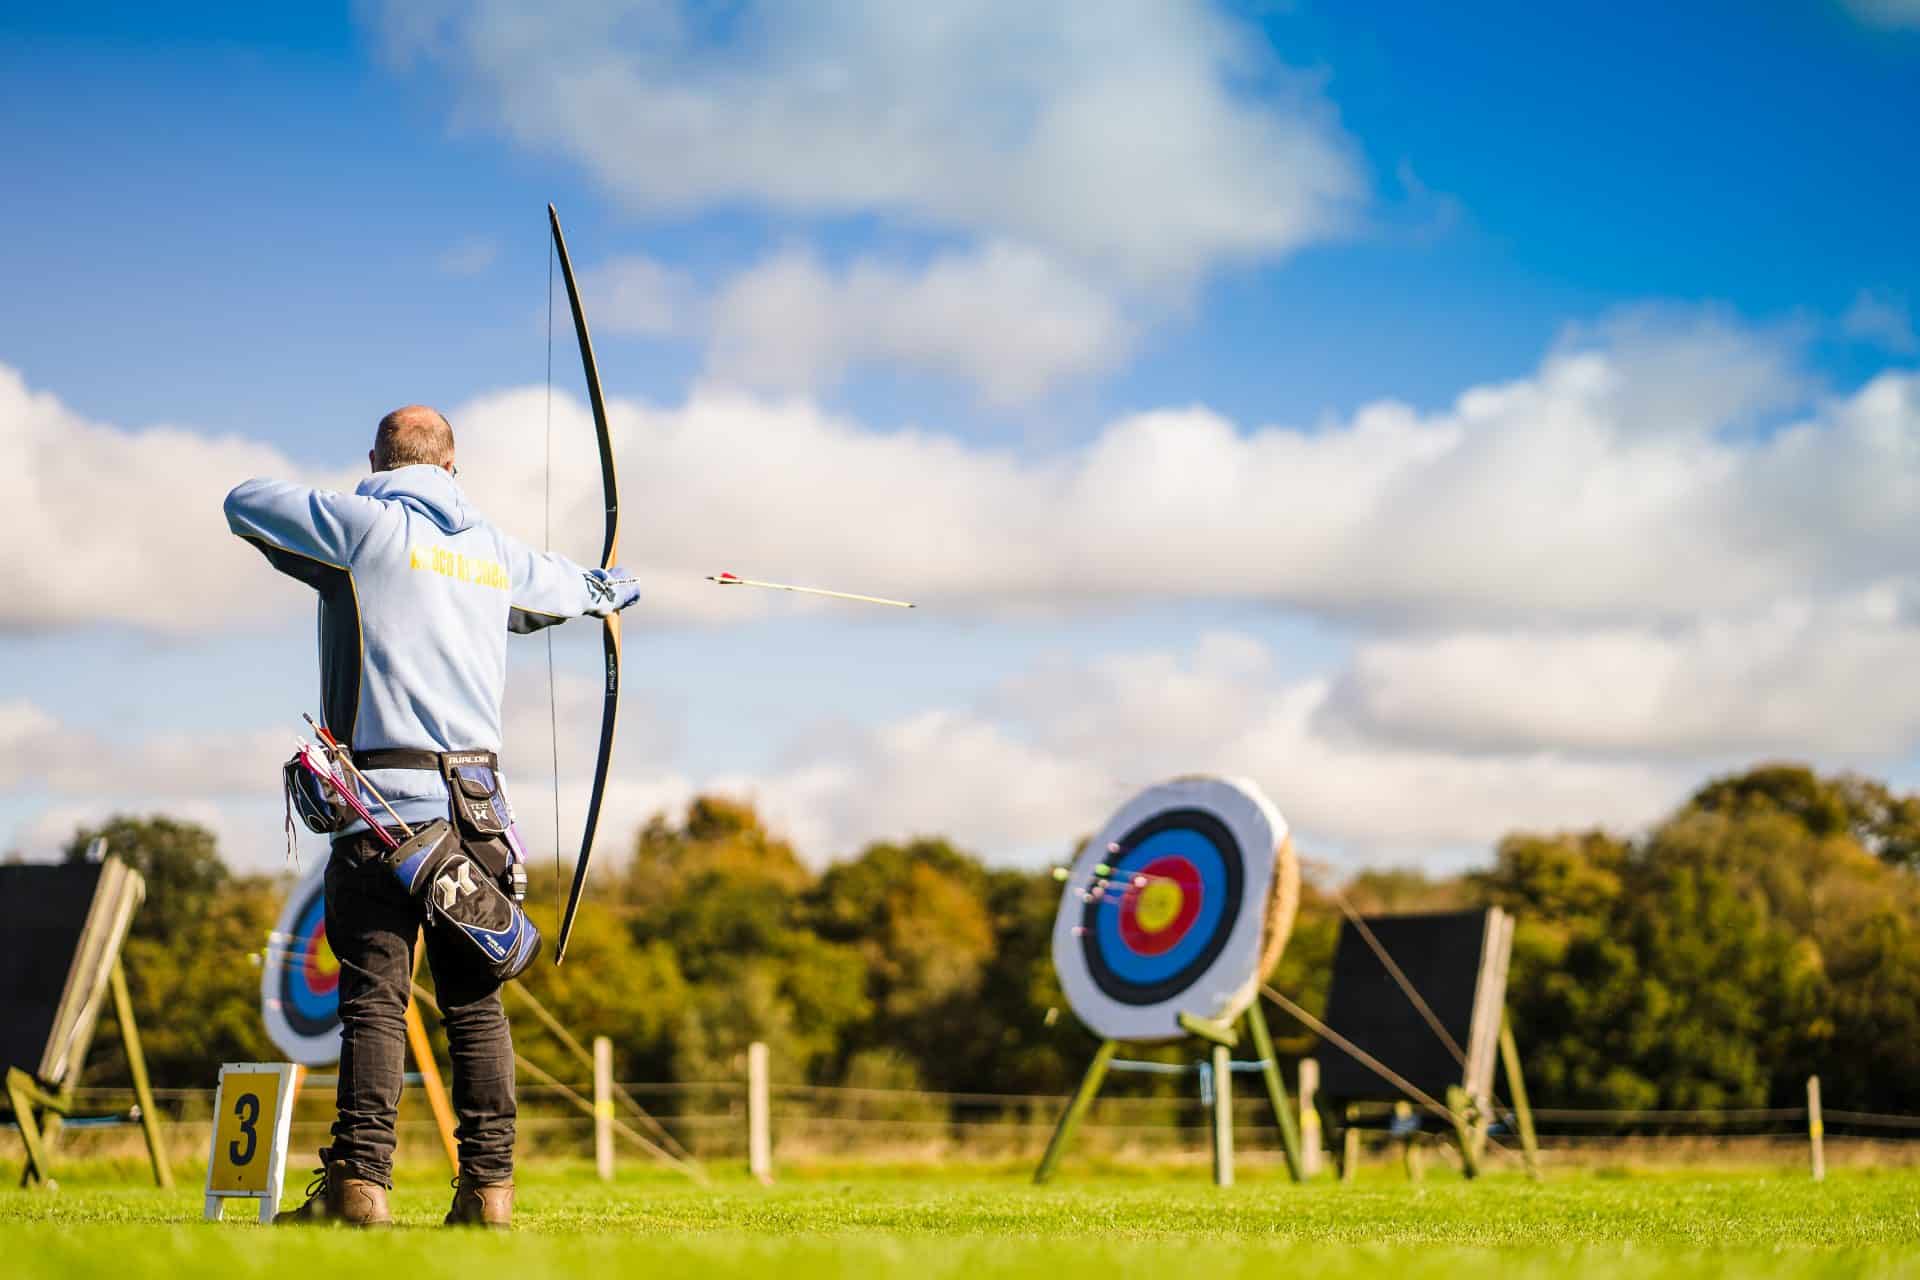 Join us to celebrate archerys volunteers, clubs and projects at Archery GB's Club and Volunteer Awards